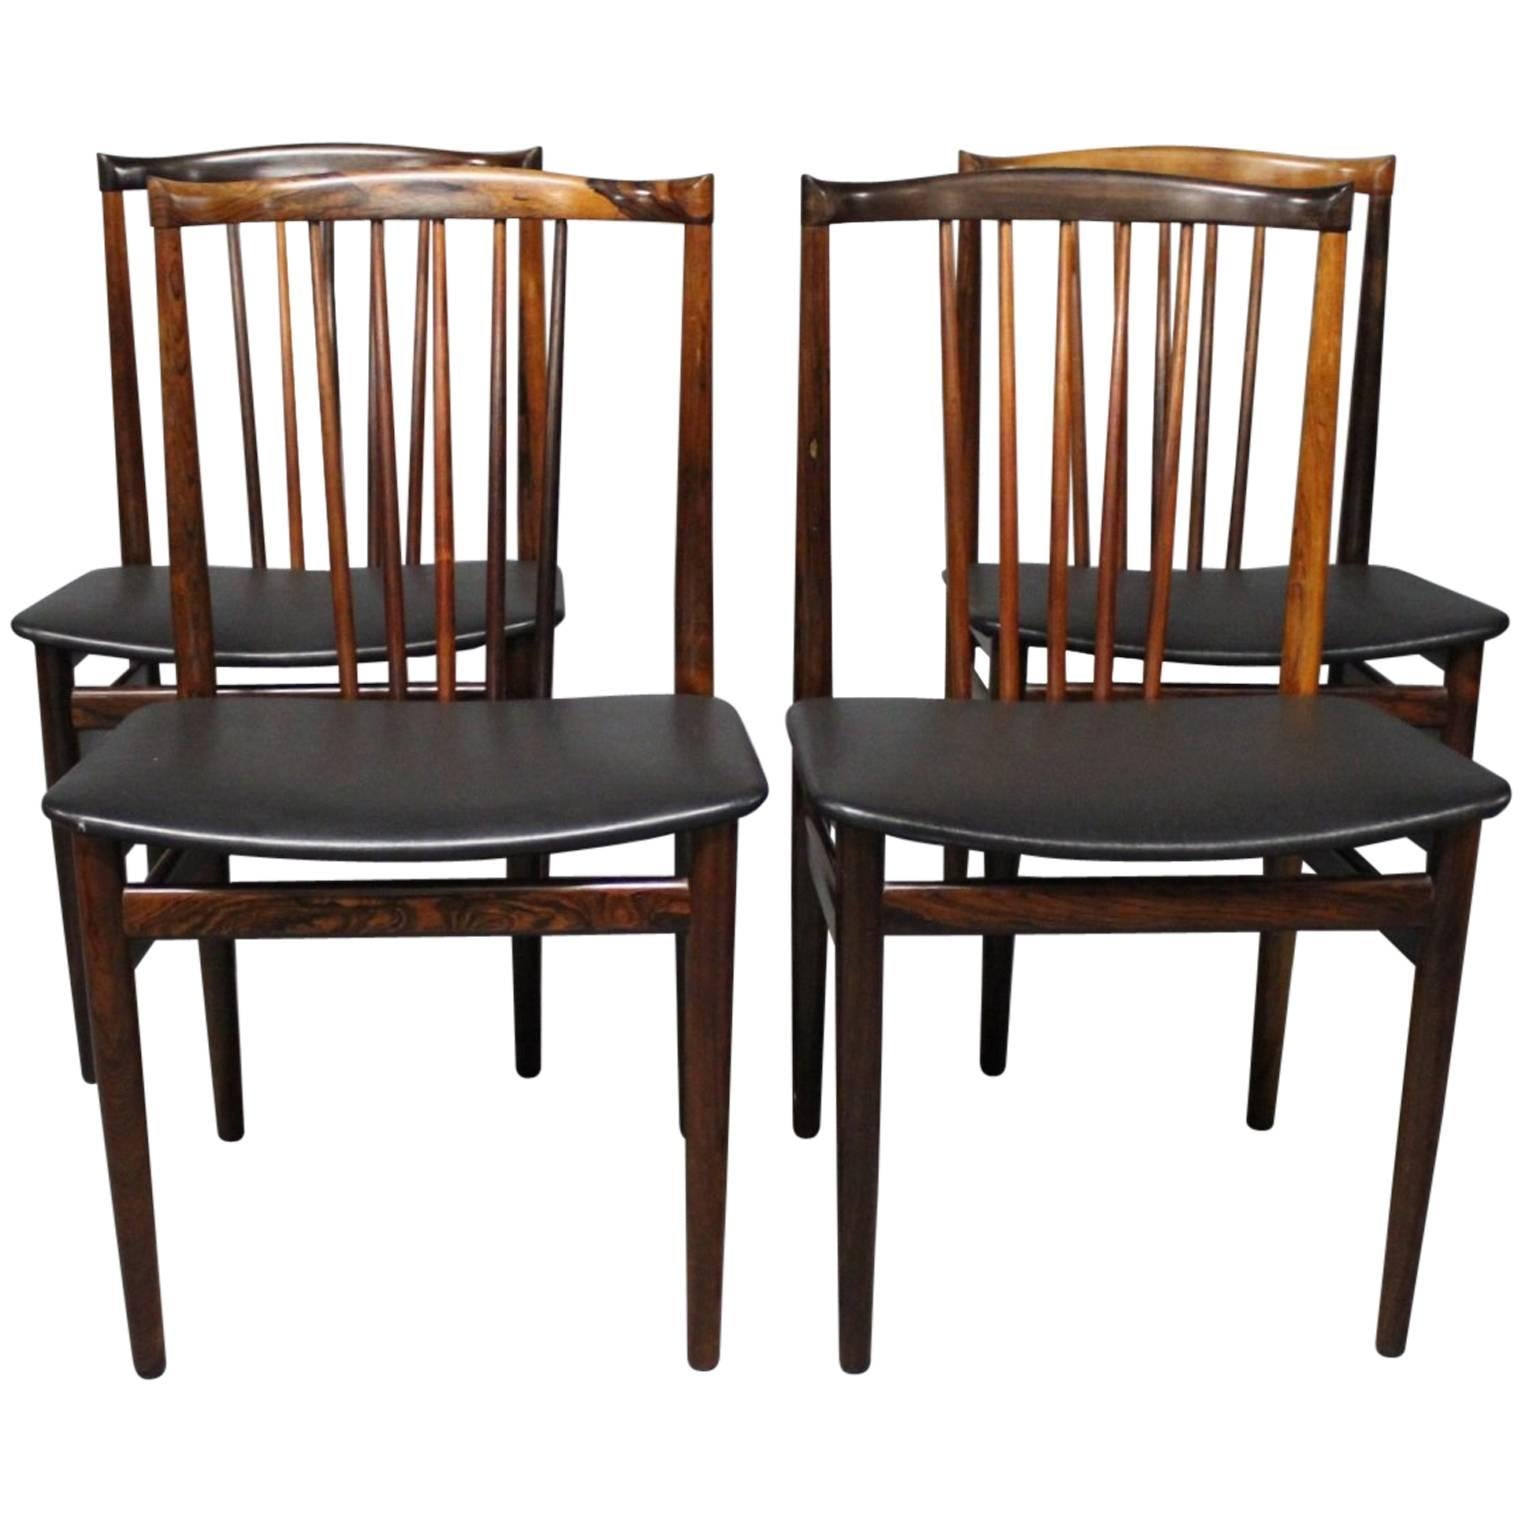 Set of Four Dining Room Chairs by Henning Sørensen, 1968